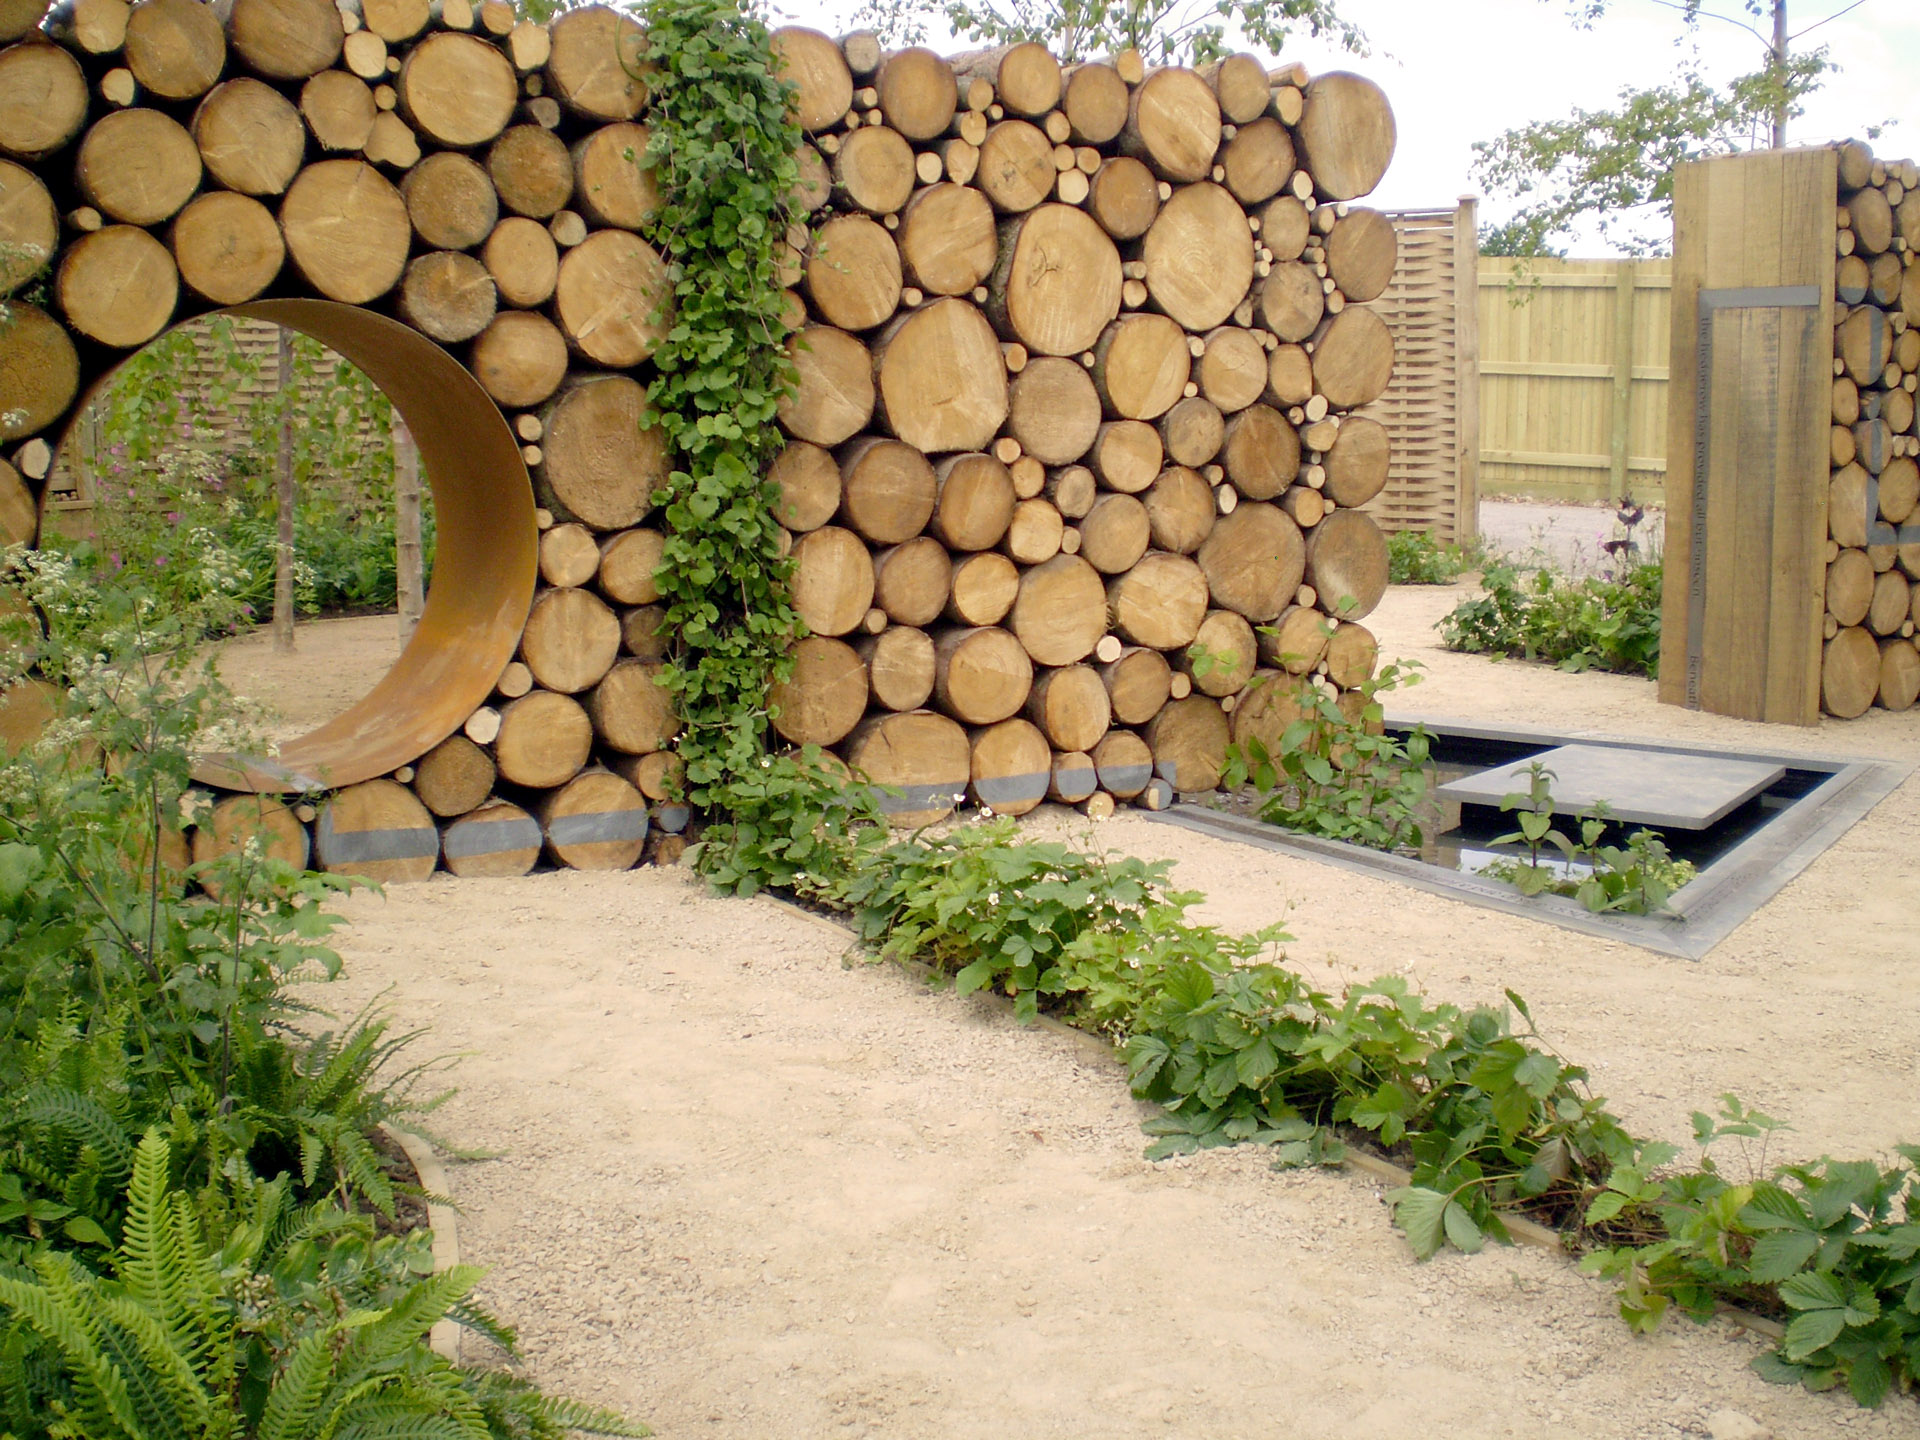 Show garden with wooden partition with hole in it and plants up the side